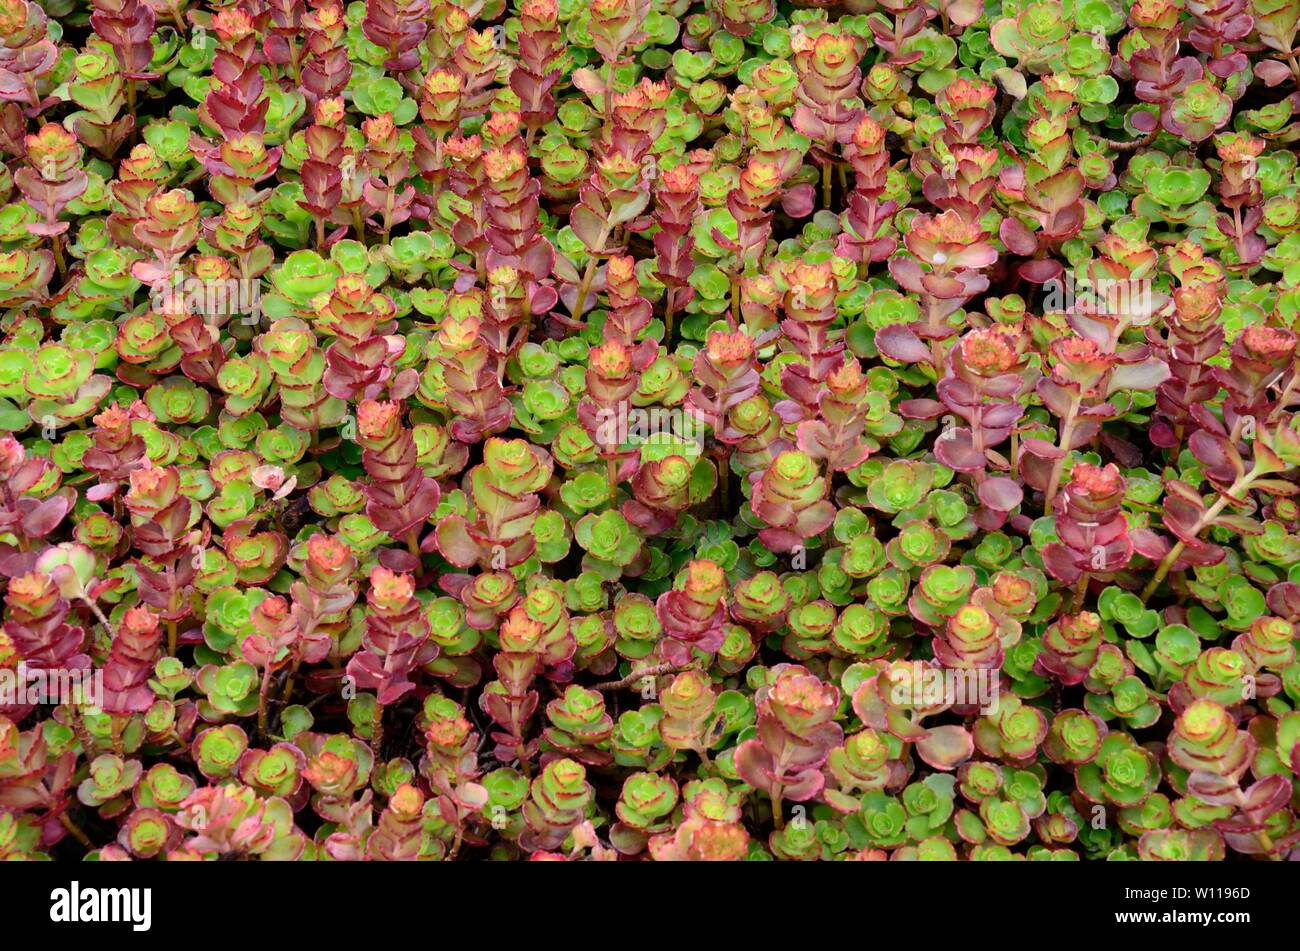 Dragons Blood Plant High Resolution Stock Photography And Images Alamy